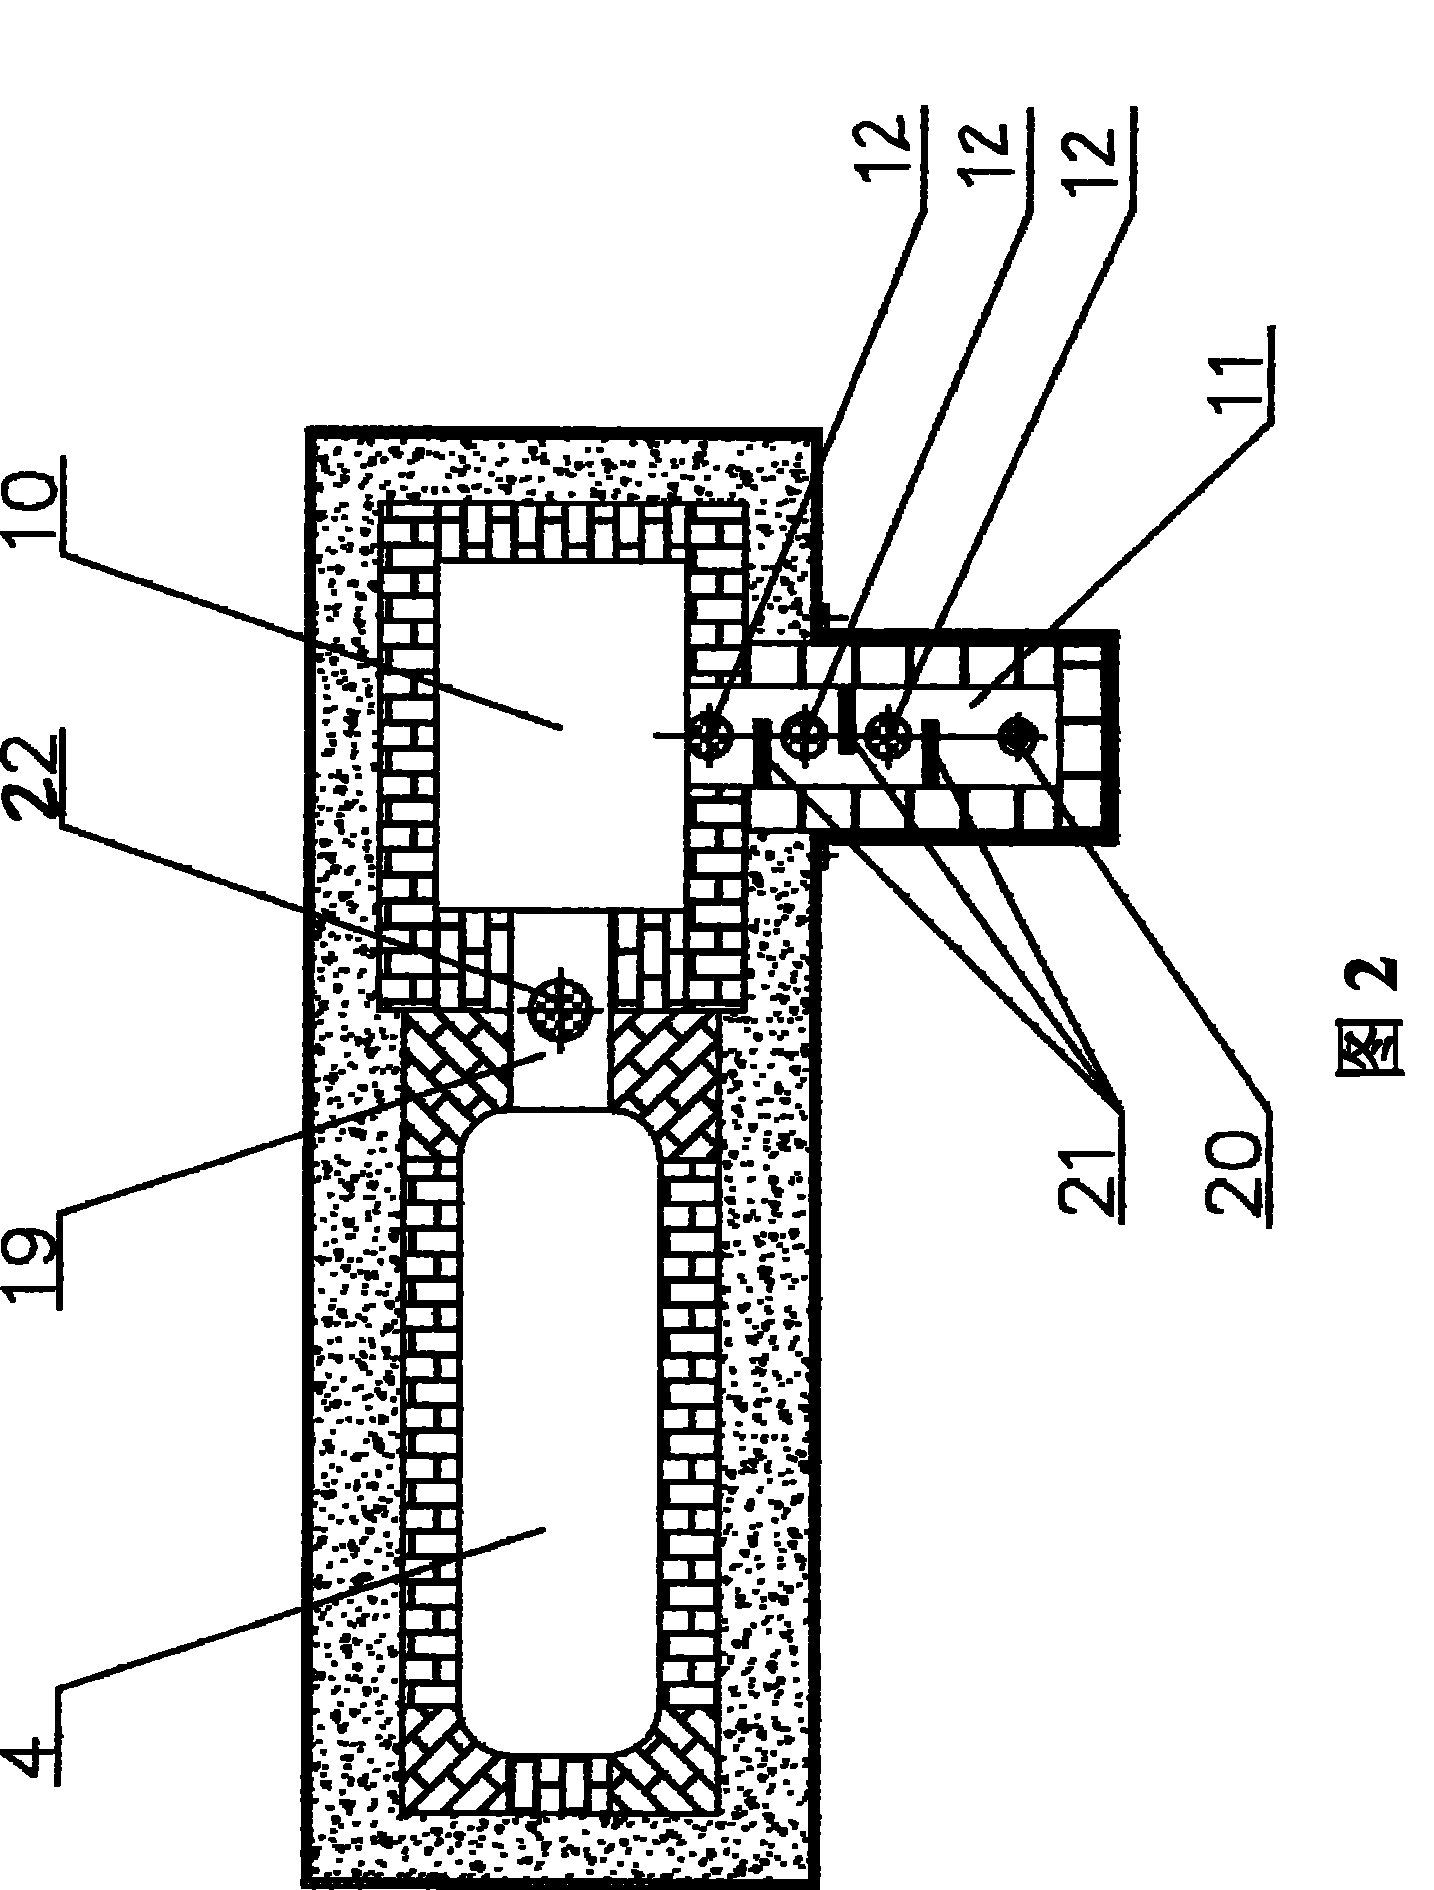 Method for continuously converting and casting oxygen-free copper ingot